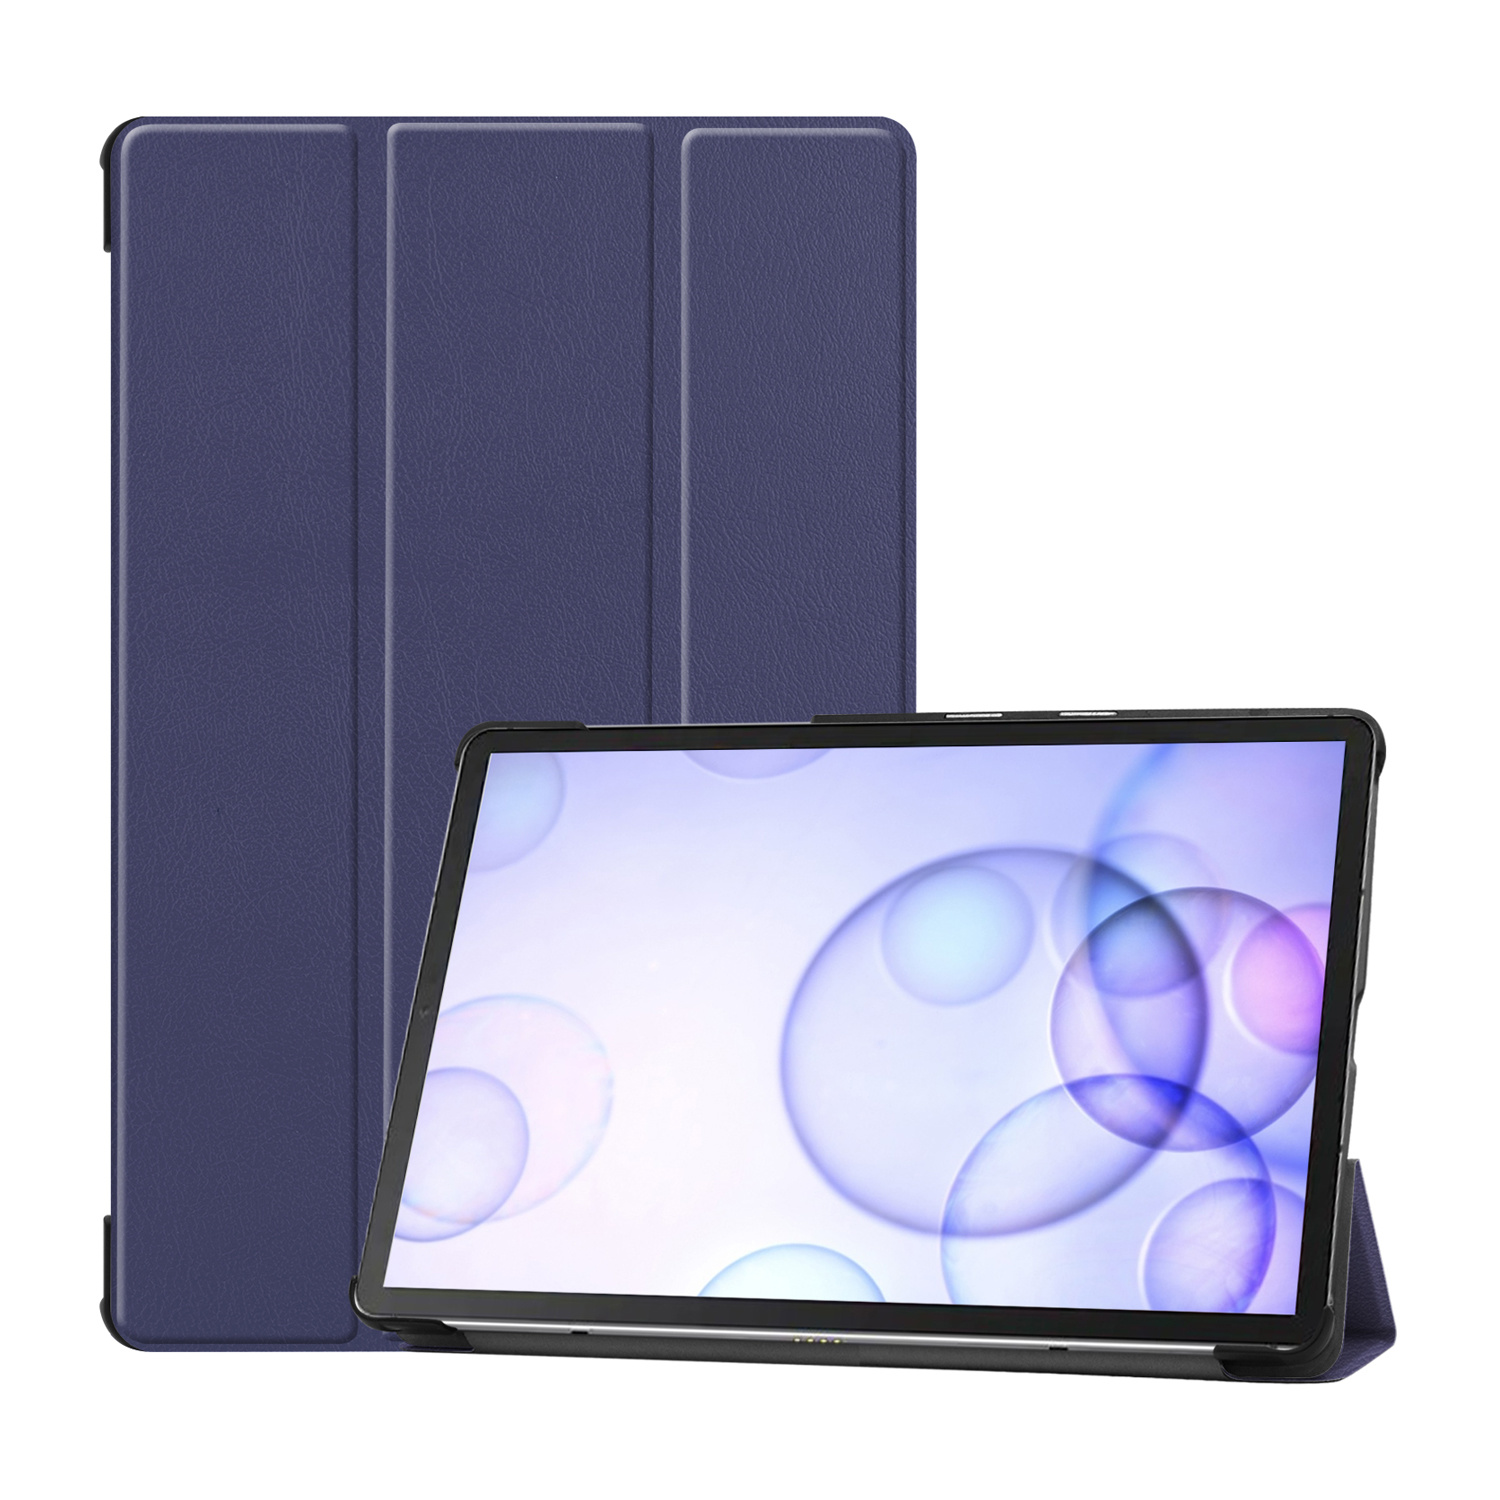 boot Iedereen Betreffende 3-Vouw sleepcover hoes Samsung Galaxy Tab S6 - Blauw | CasualCases.nl -  CasualCases.nl